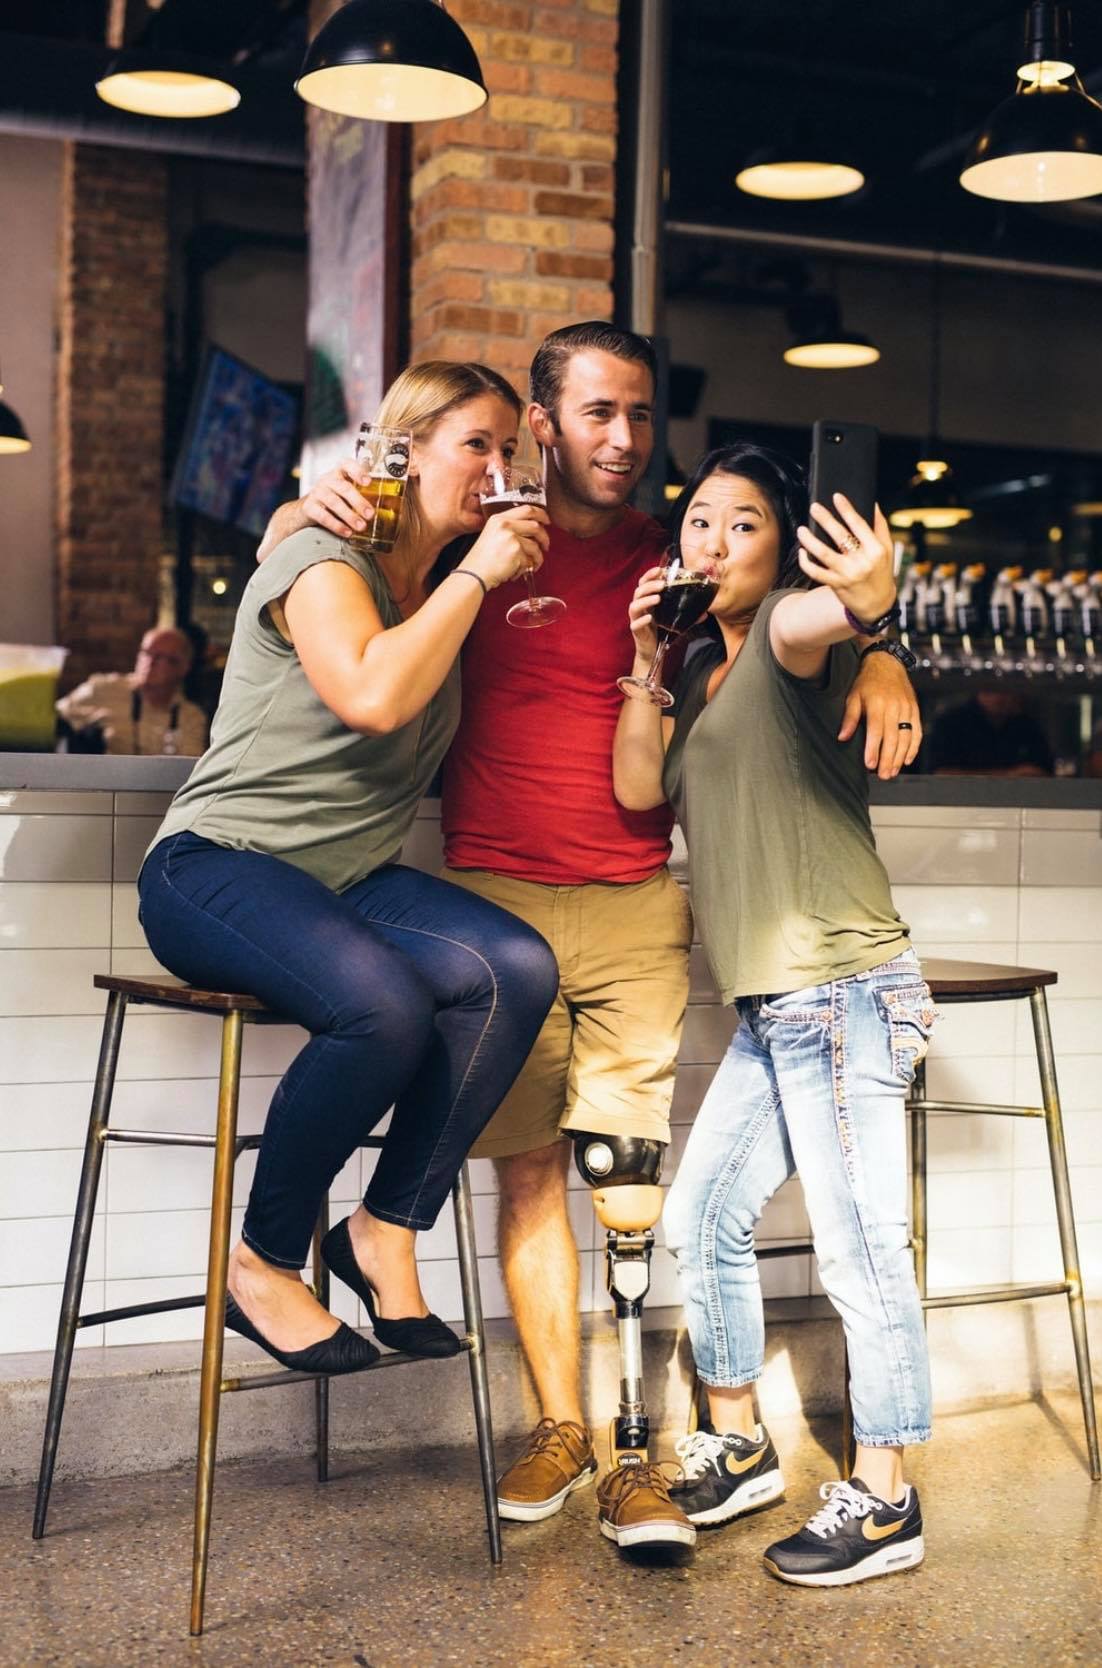 Image appears to be of three people in a bar taking a group selfie. There is a man standing in the middle holding his drink, arms around the shoulders loosely of the two woman and he has a prosthetic leg. The woman on the left leans in posing with her drink up and the woman on the right leans into him pretending to drink and taking the photo with a phone.